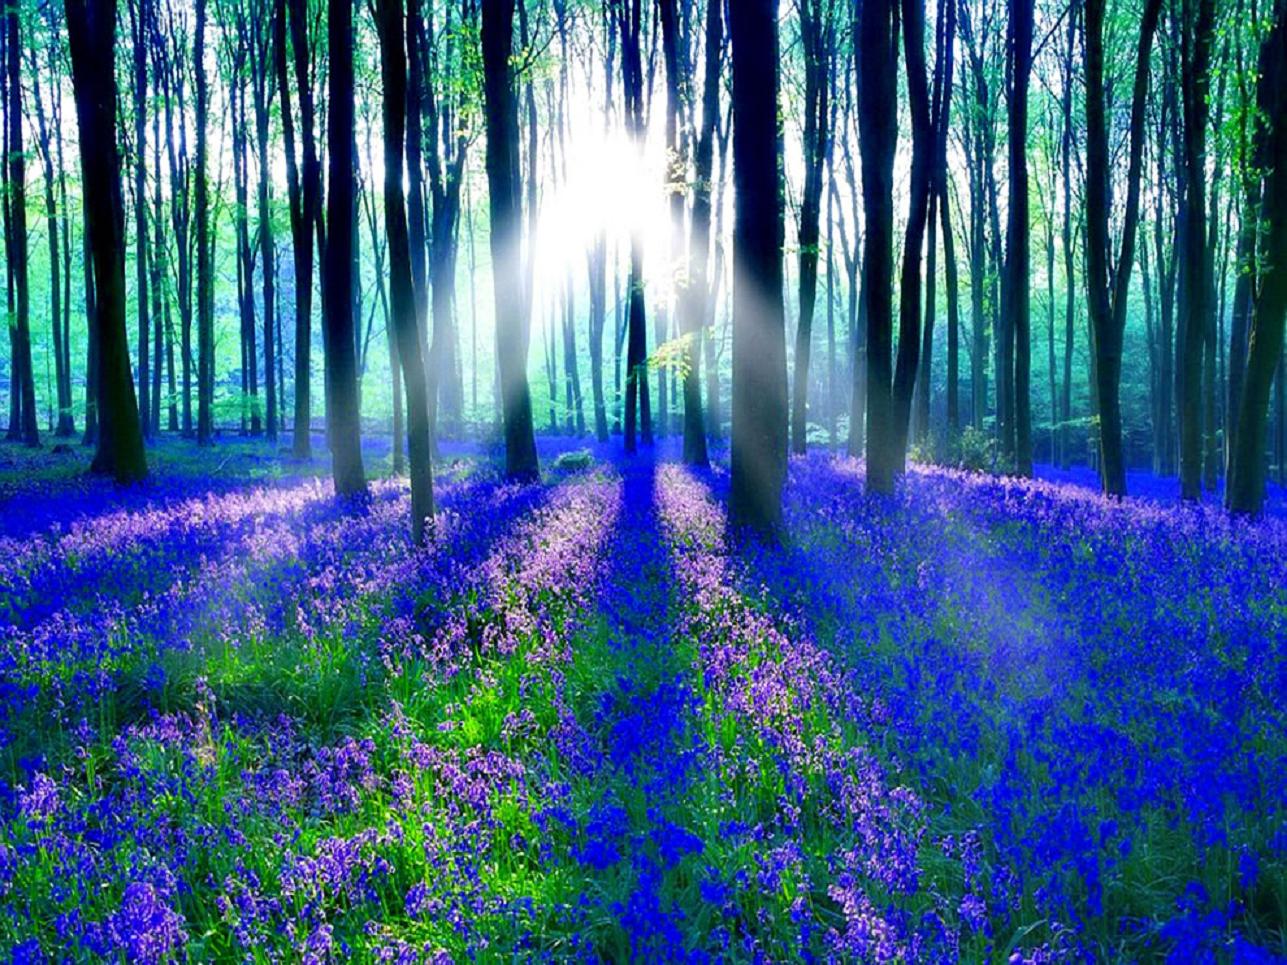 Bluebells in wooded area. Becomes a unicorn running in a field of goldenrod when the word Unicorn is clicked